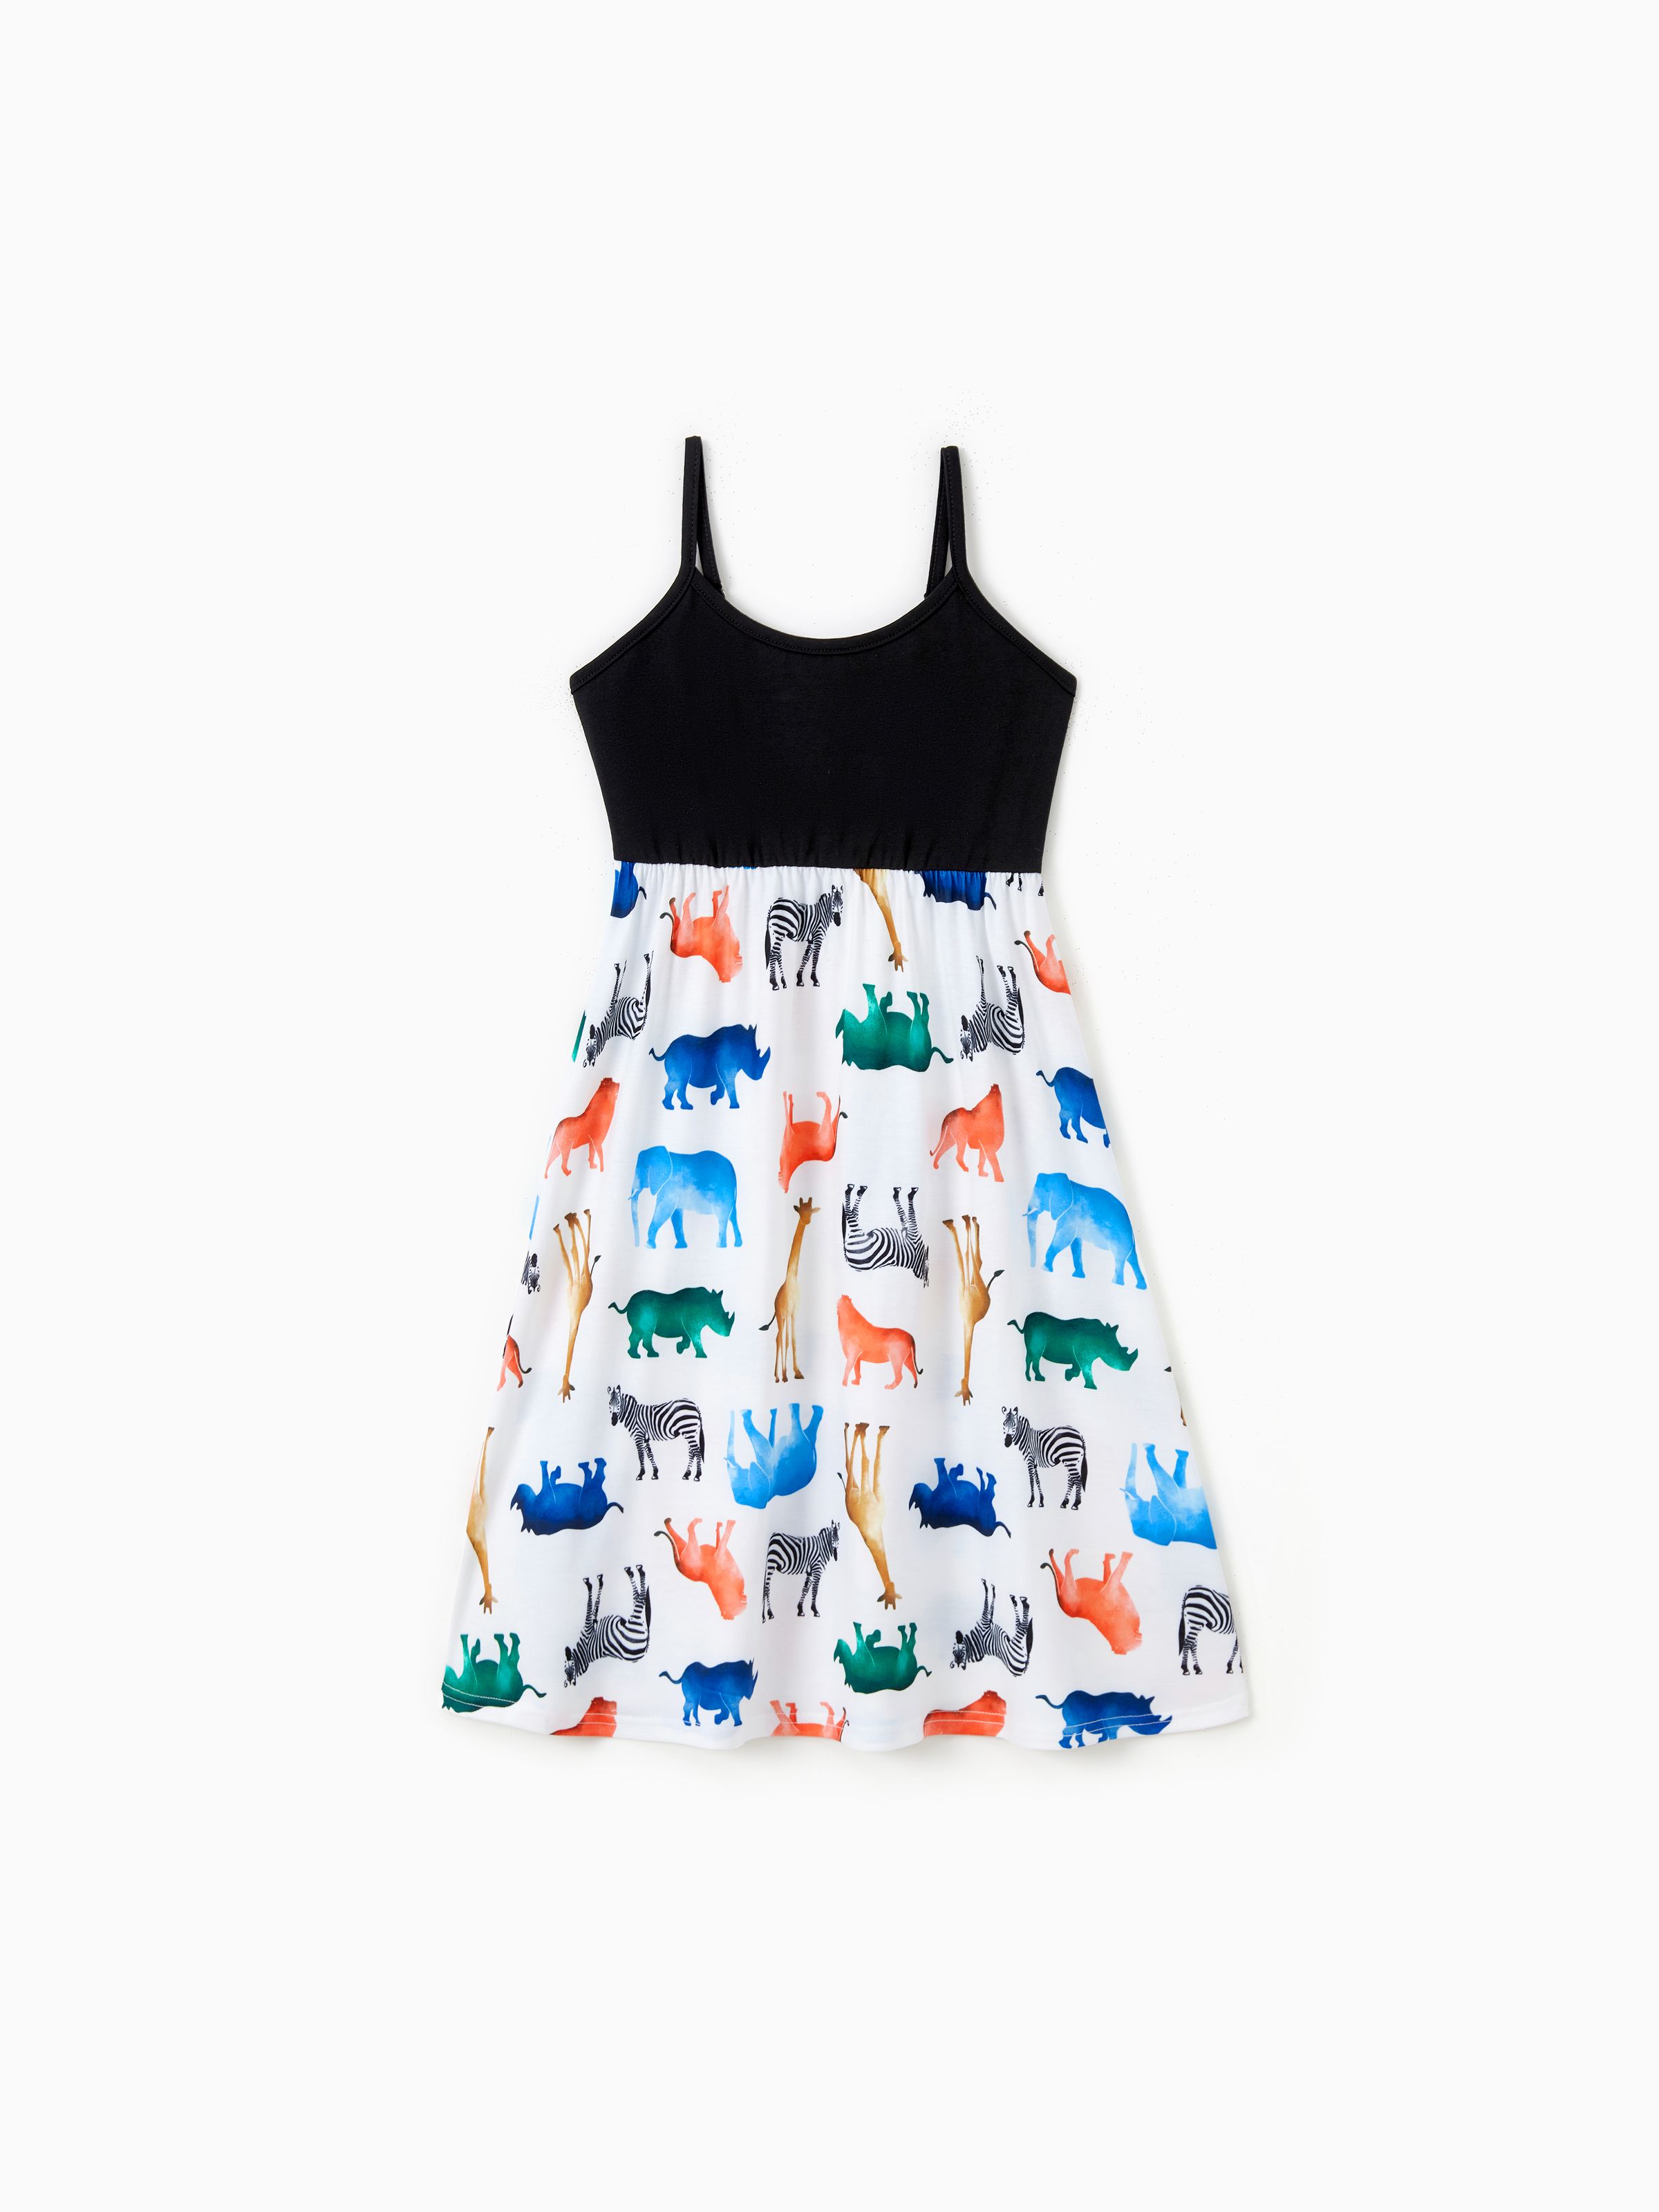 

Family Matching Sets Black/Animal Allover Tee or Black Cami Top Spliced Colorful Animal Pattern Bottom Strap Dress